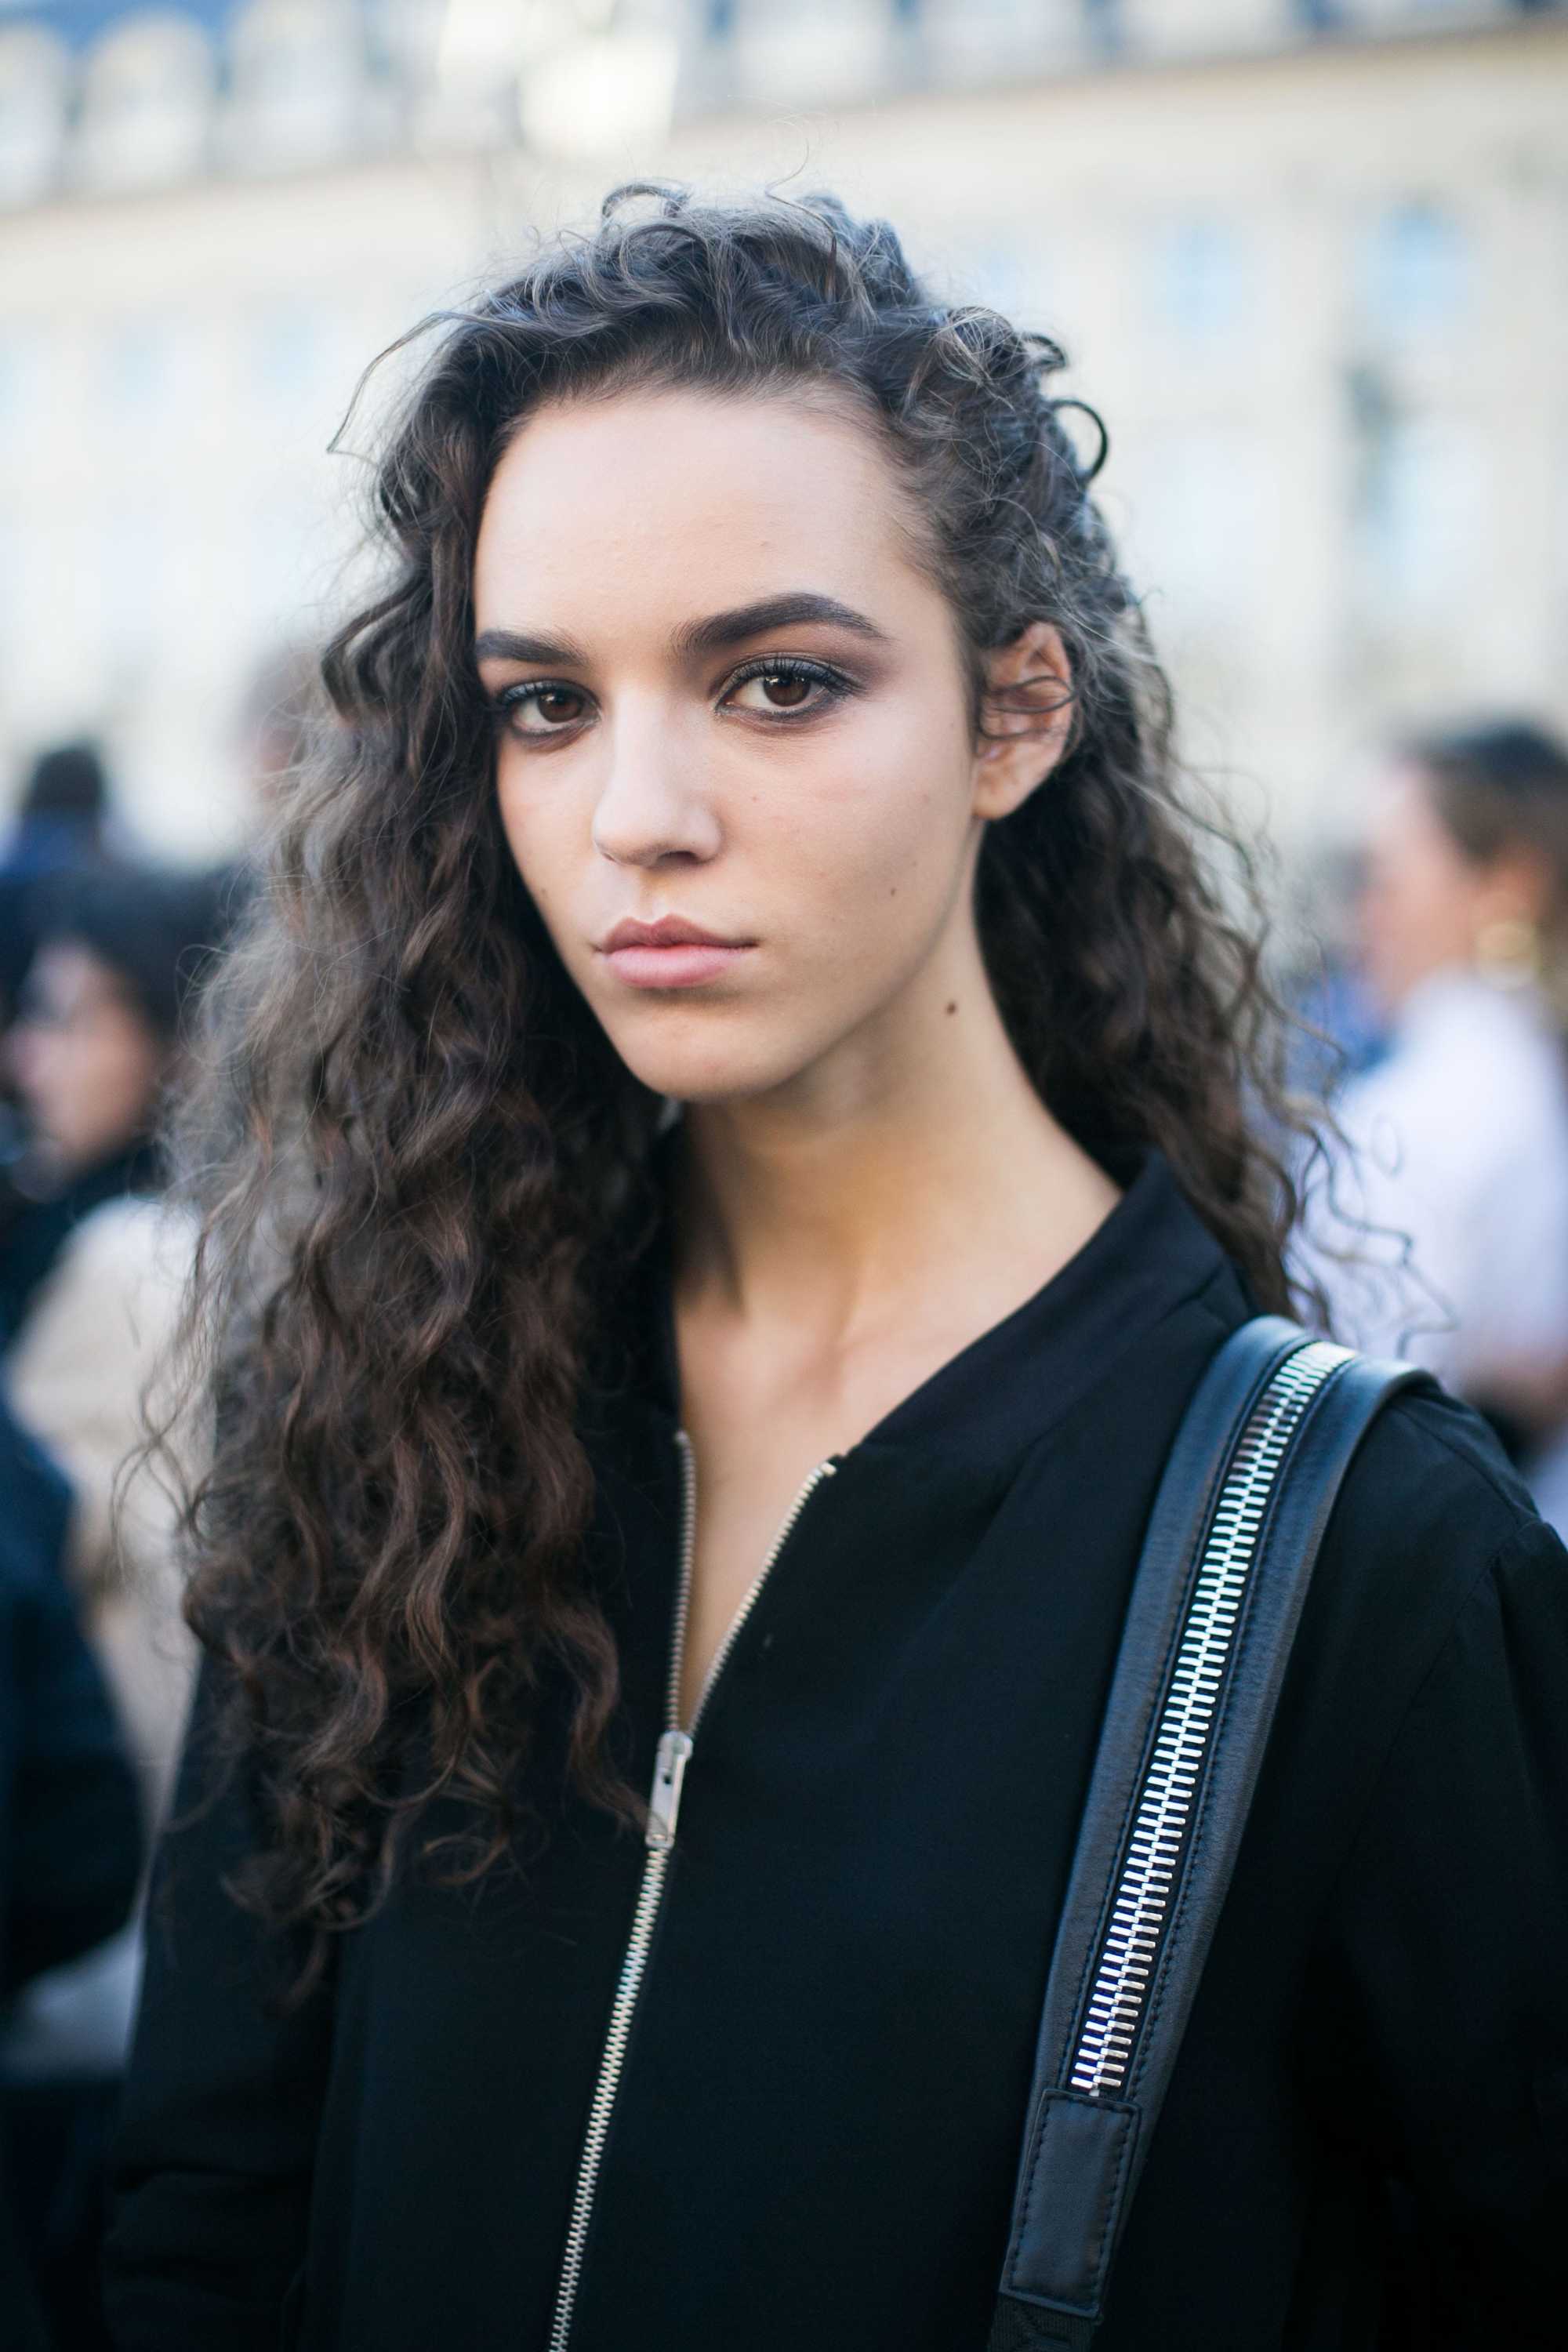 model with long curly hair wearing black